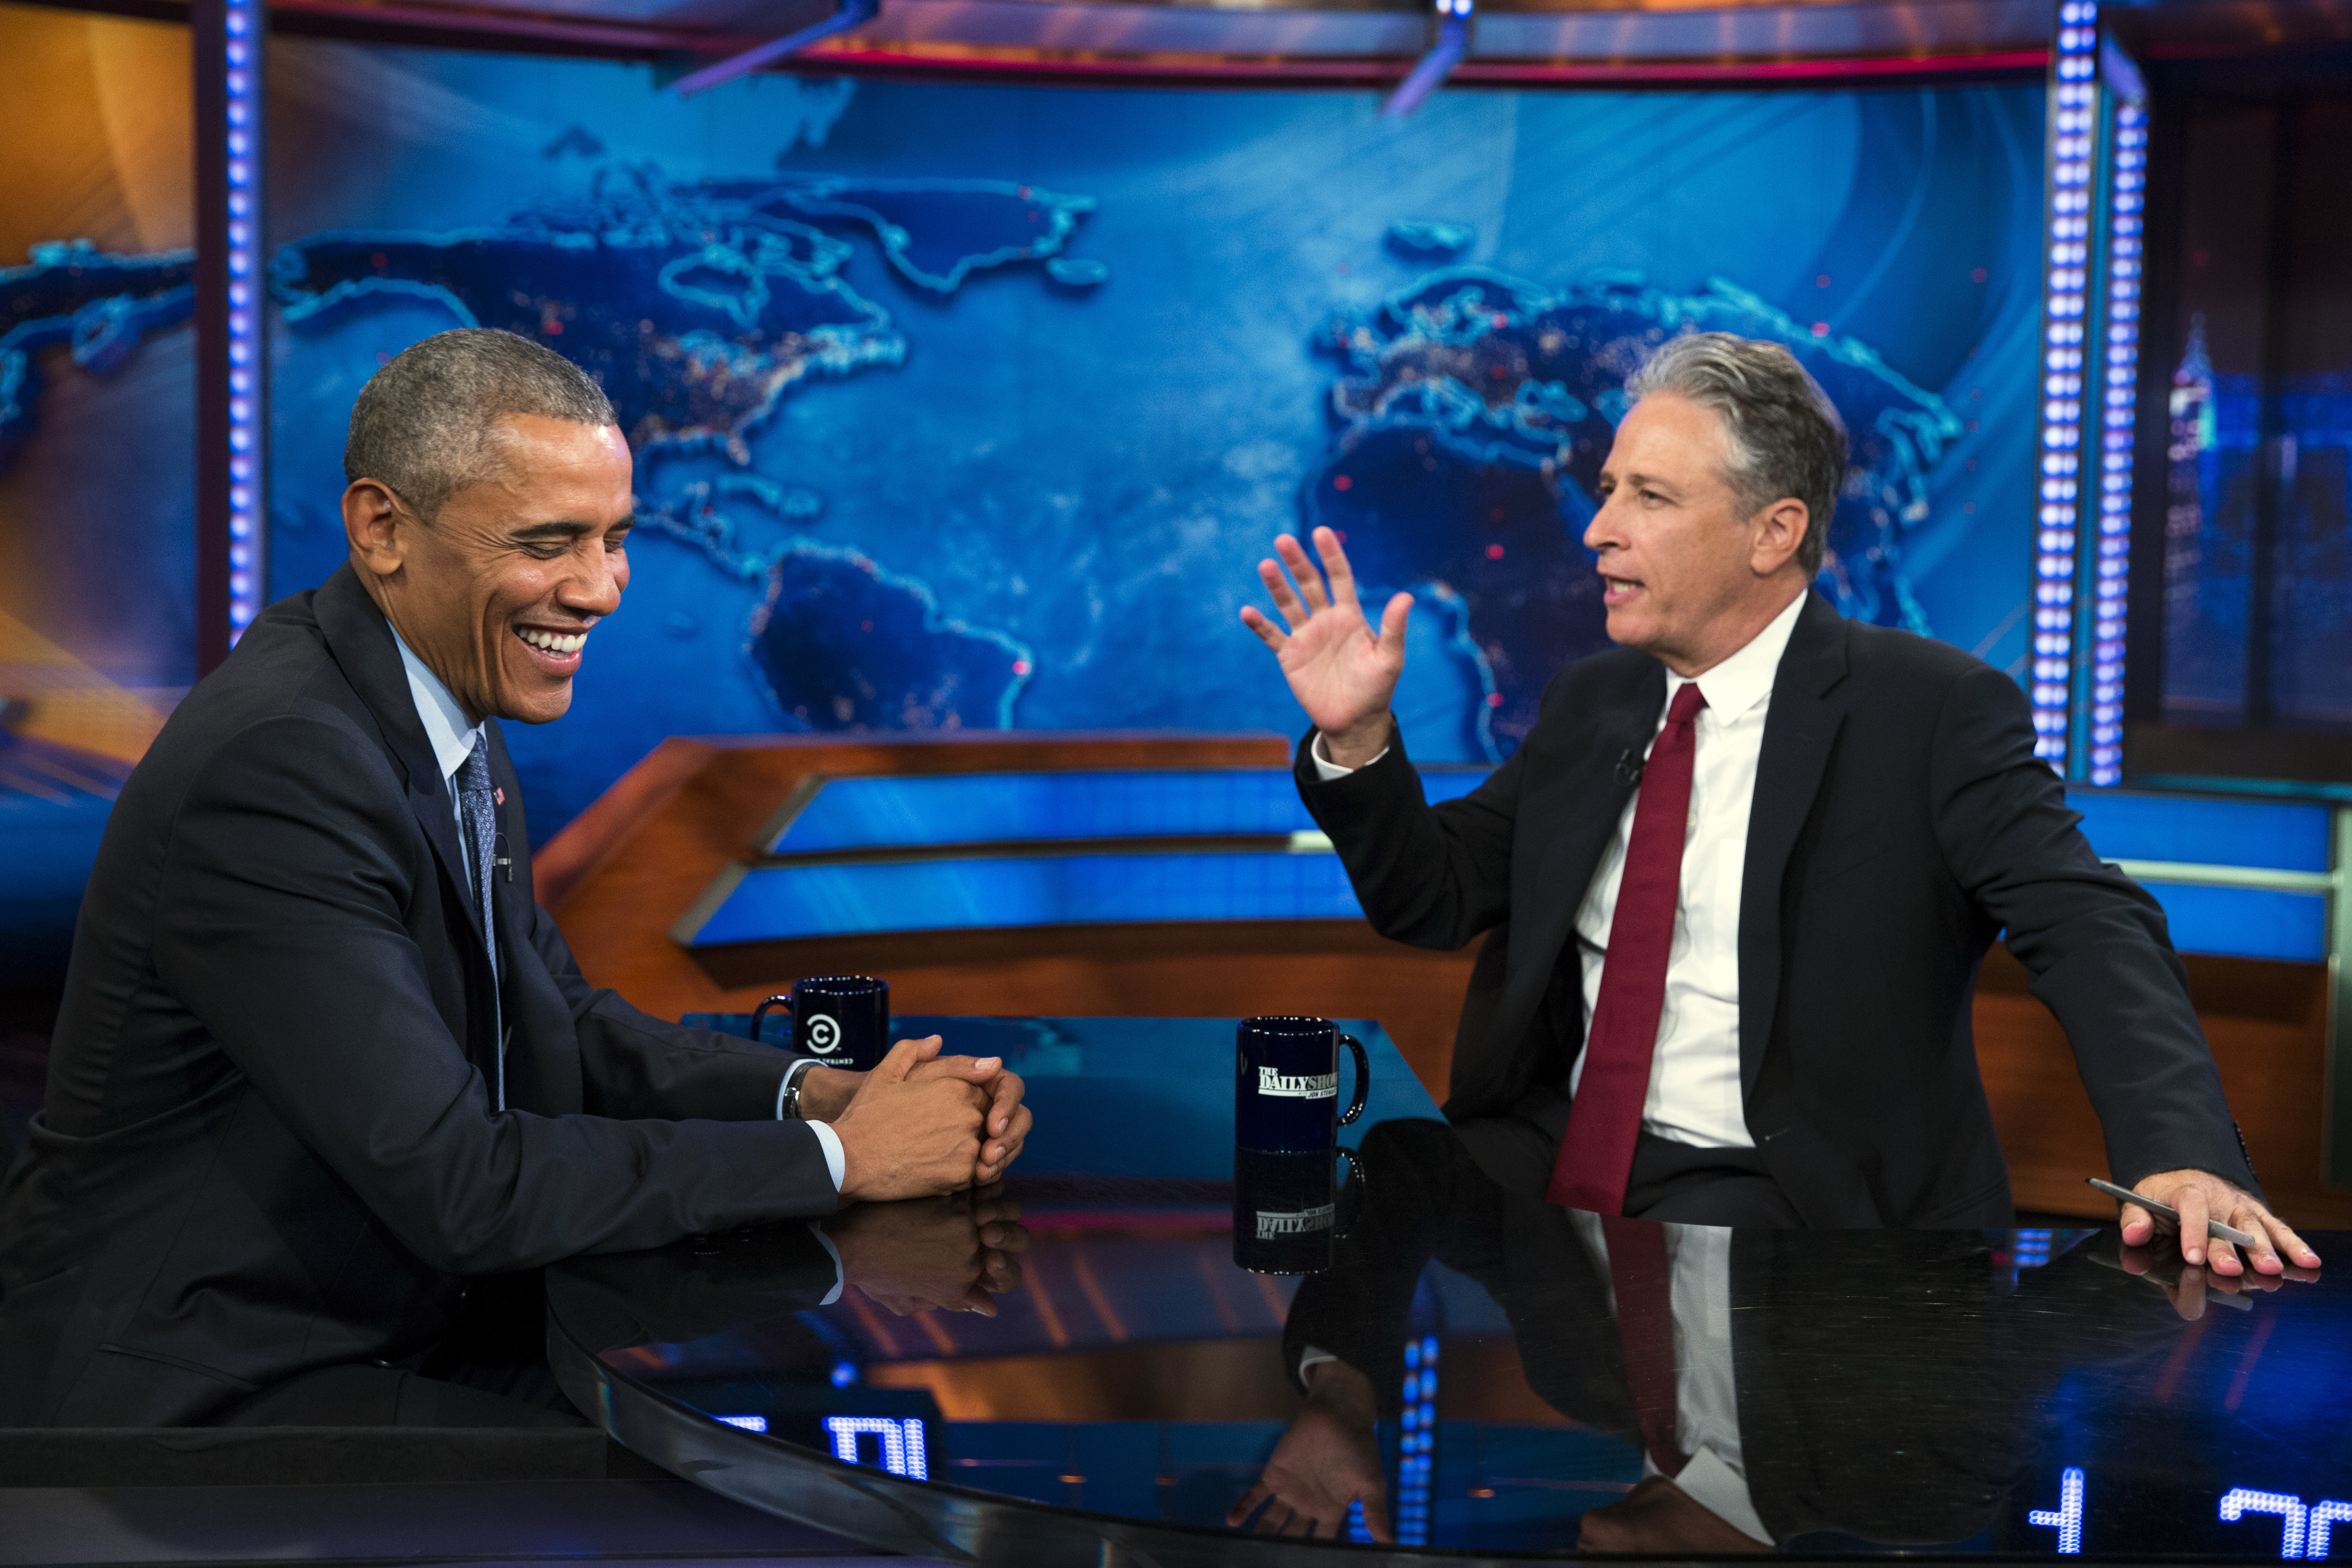 President Barack Obama, left, talks with Jon Stewart, host of "The Daily Show" during a taping on Tuesday, July 21, 2015, in New York. (AP Photo/Evan Vucci)